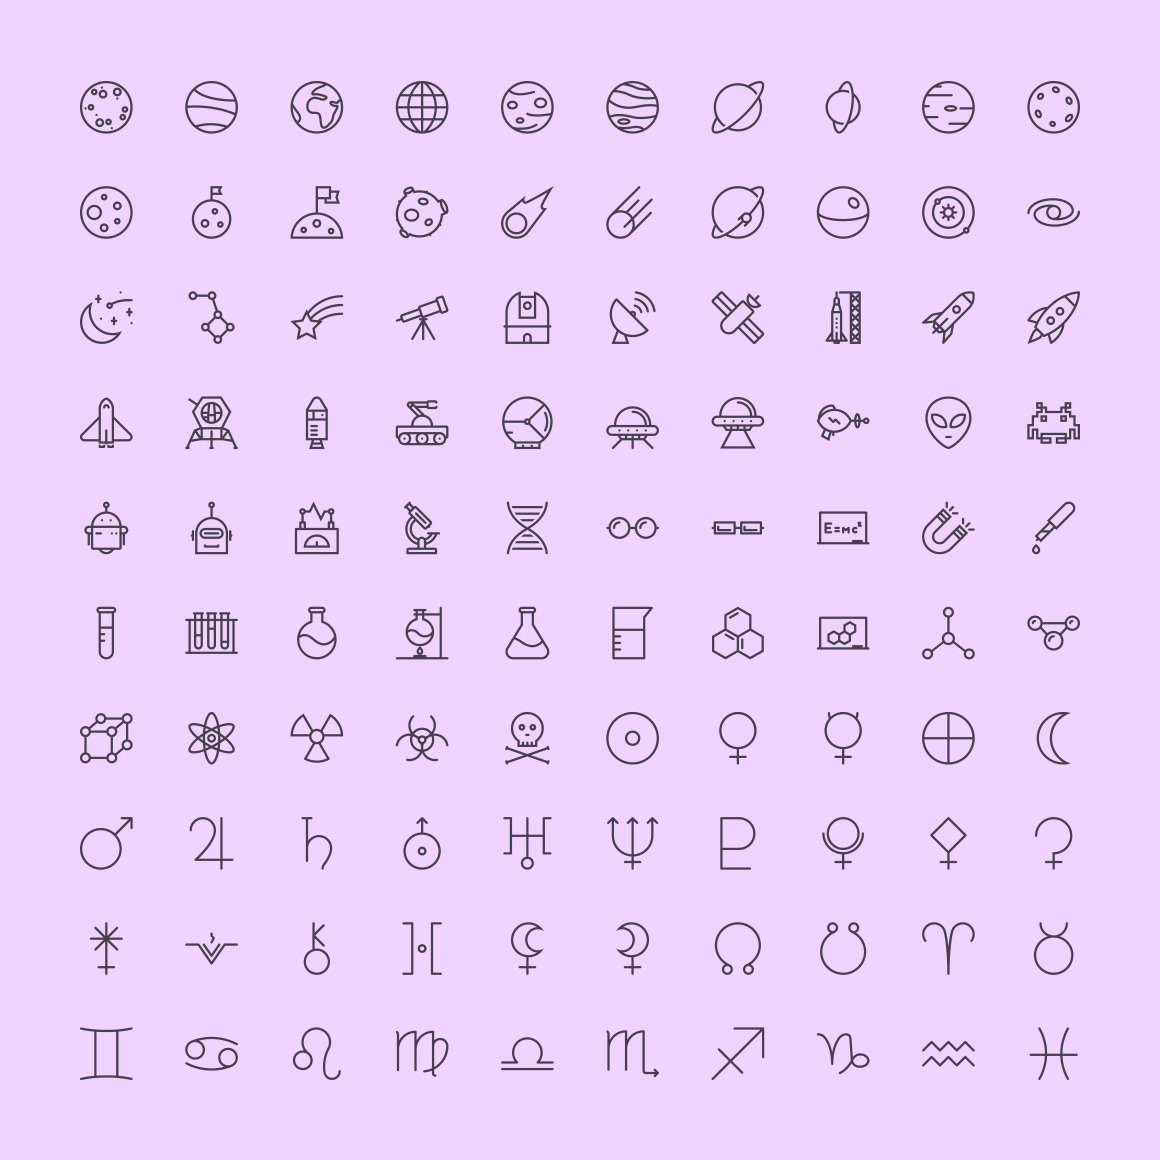 The Spaces & Science Icons 200 preview image.